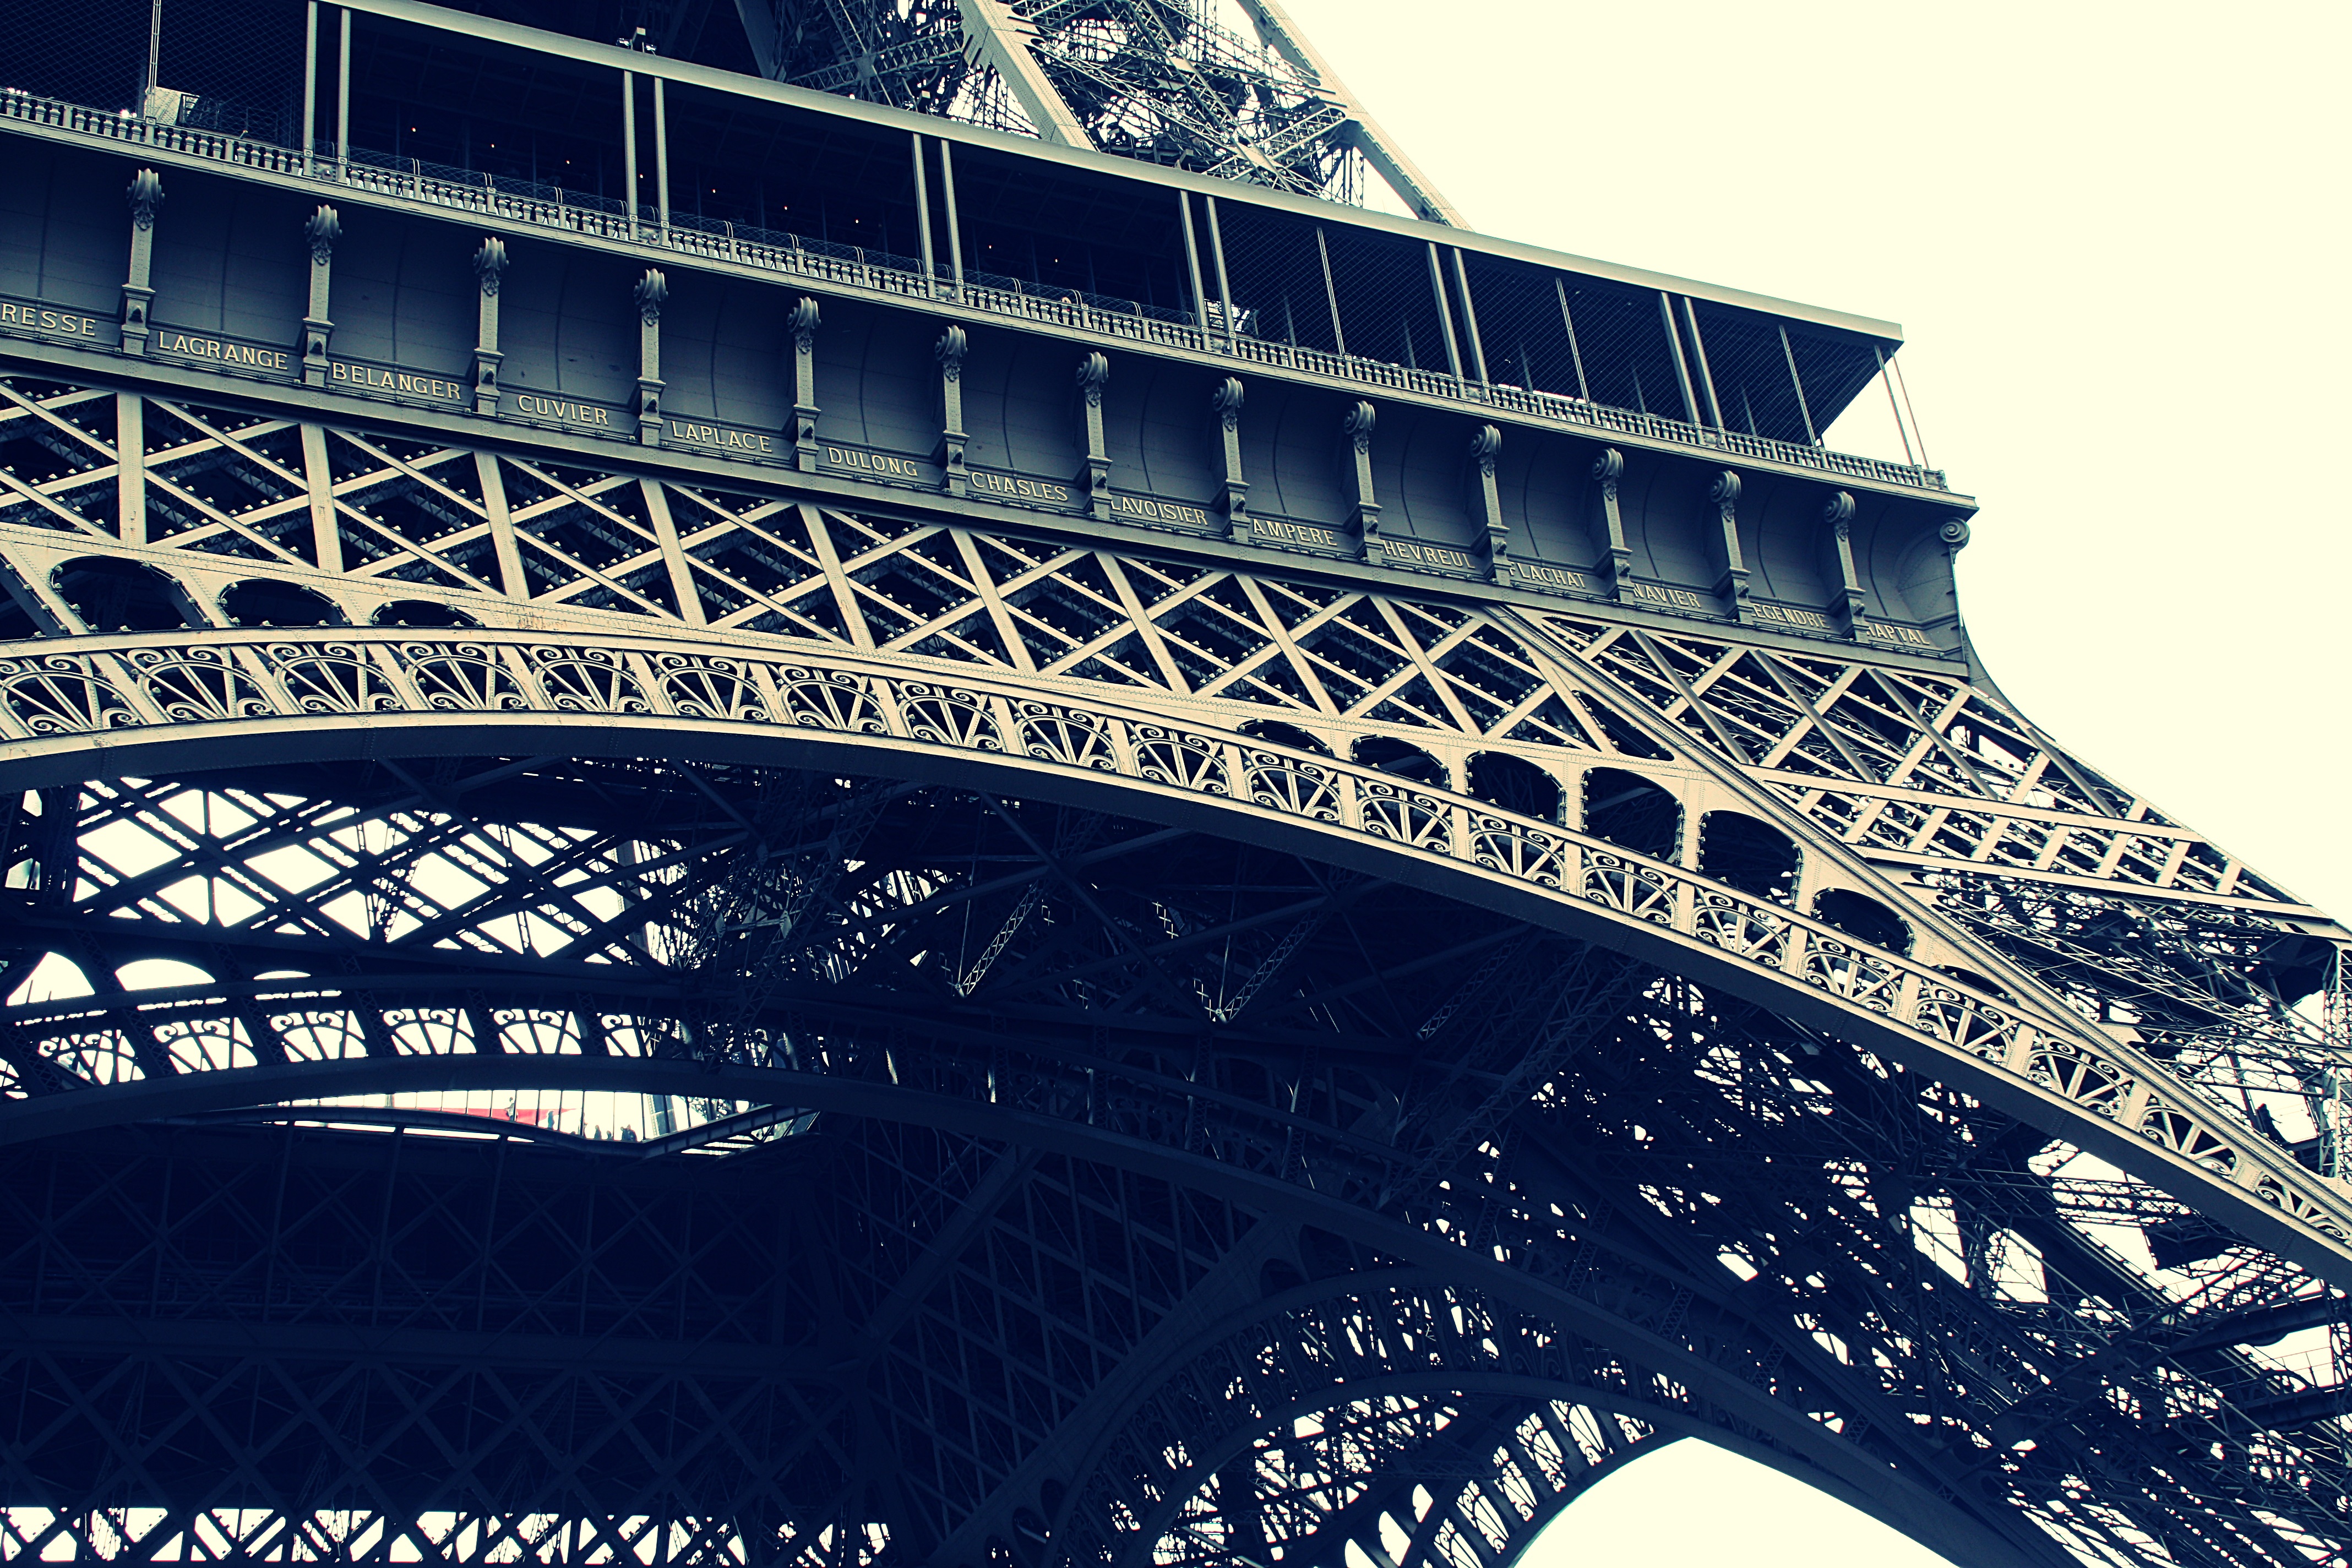 240+ Eiffel Tower HD Wallpapers and Backgrounds